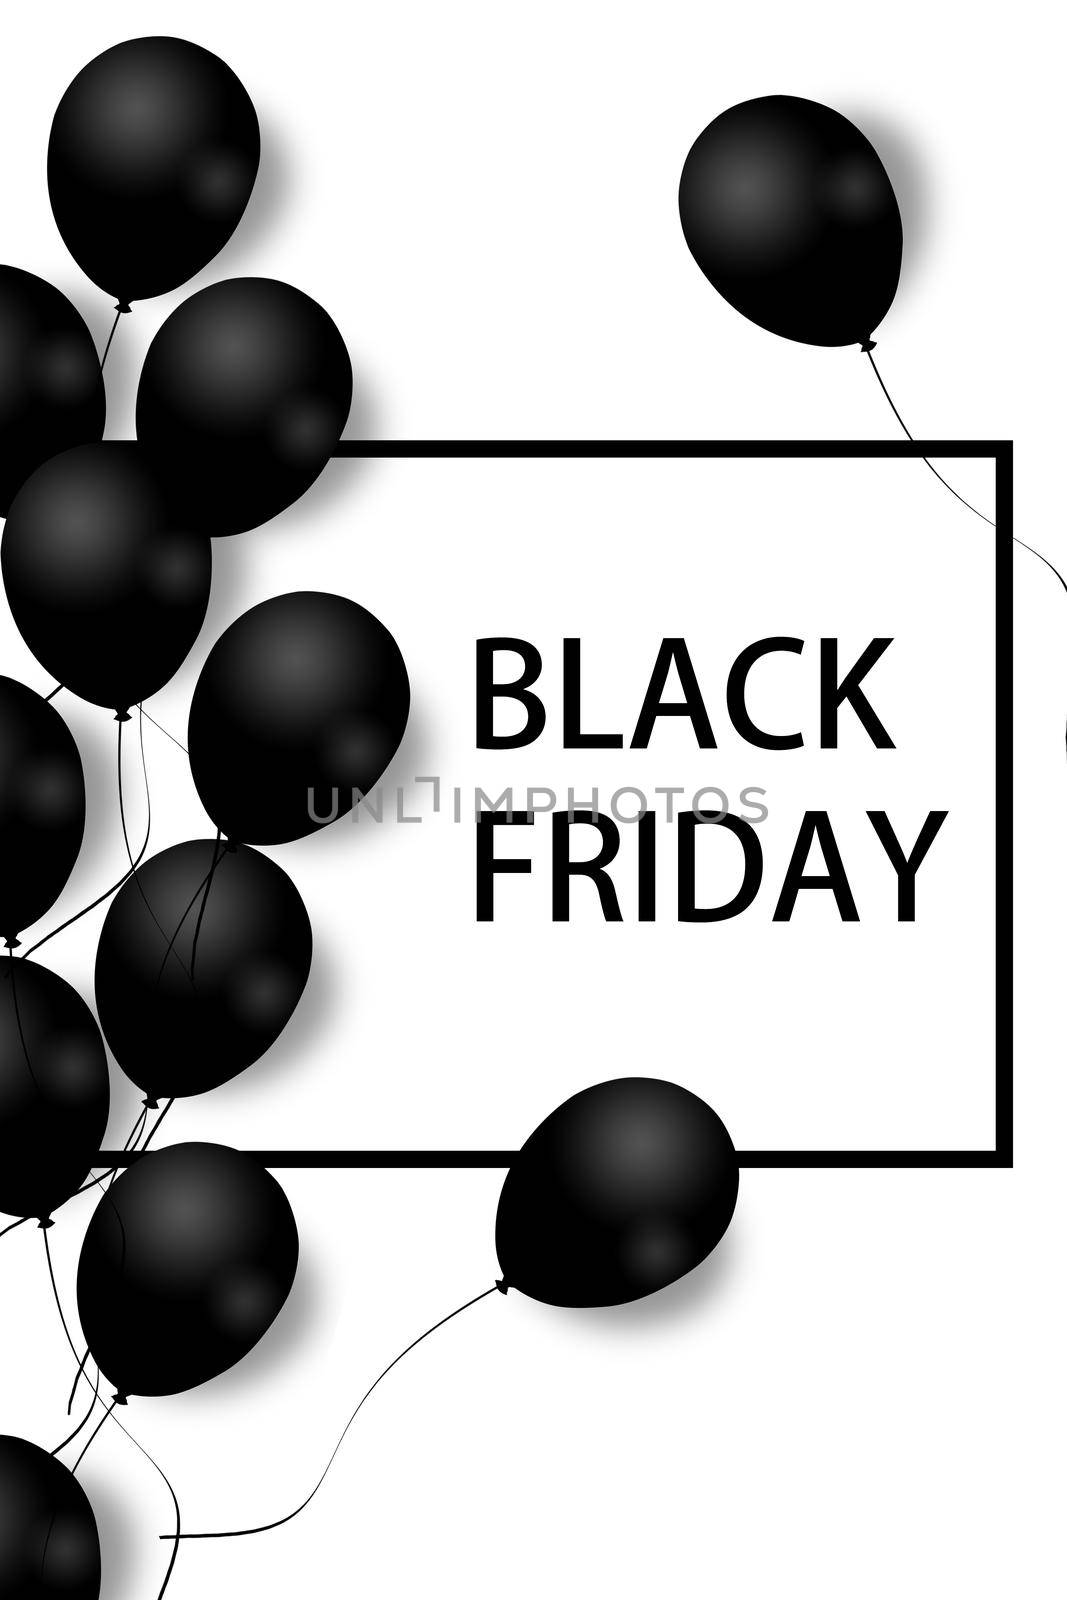 Black Friday Sale Poster with black balloons on white background with square frame. Illustration. by nazarovsergey